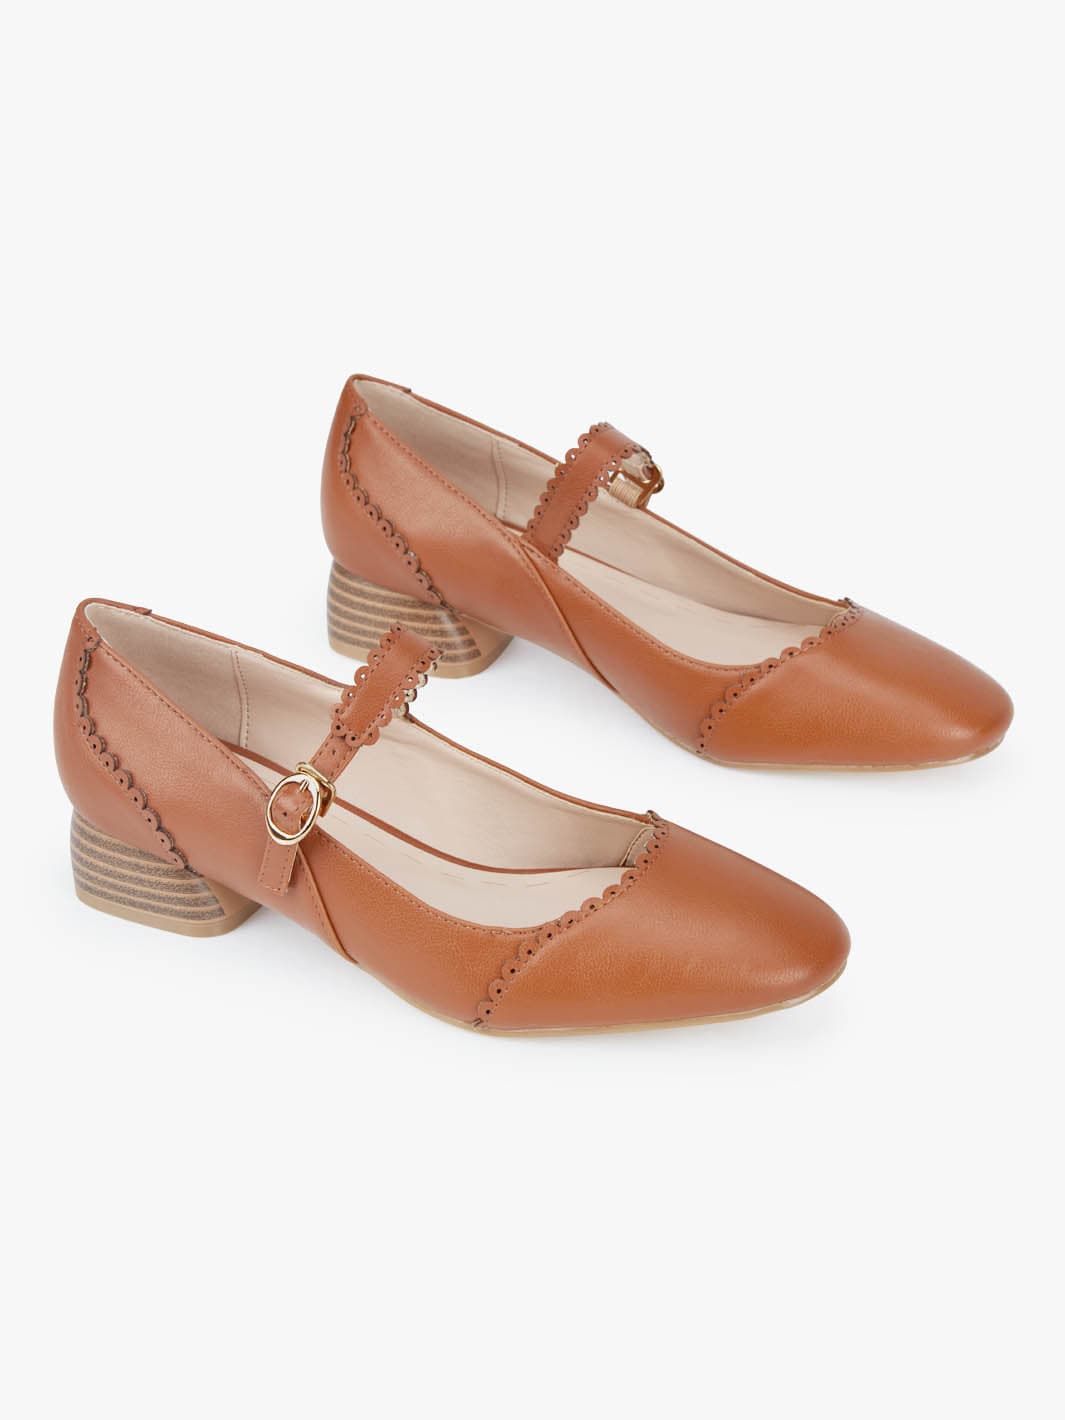 Beautiful Flora Classic Shoes - Ethically Made Vegan Leather Shoes